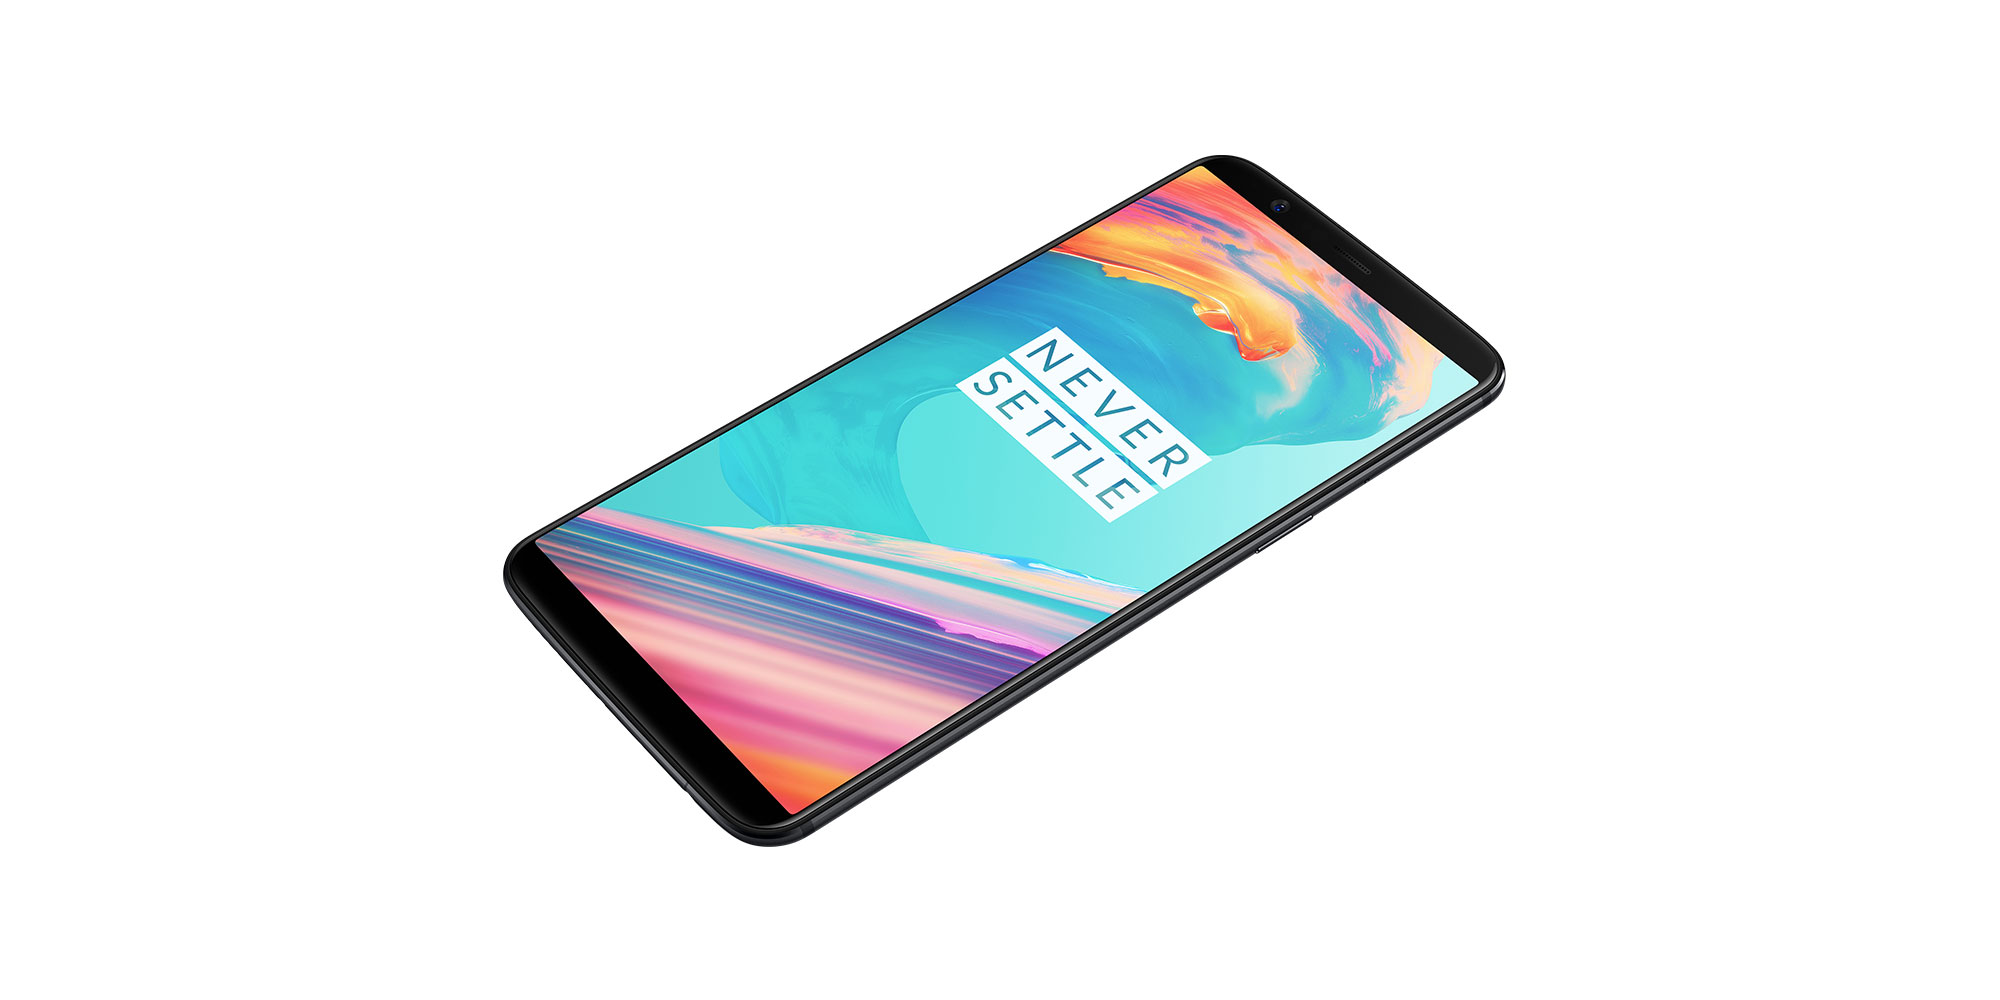 OnePlus 5T Stock Wallpapers 2K 4K Never Settle and Ringtones   DroidViews